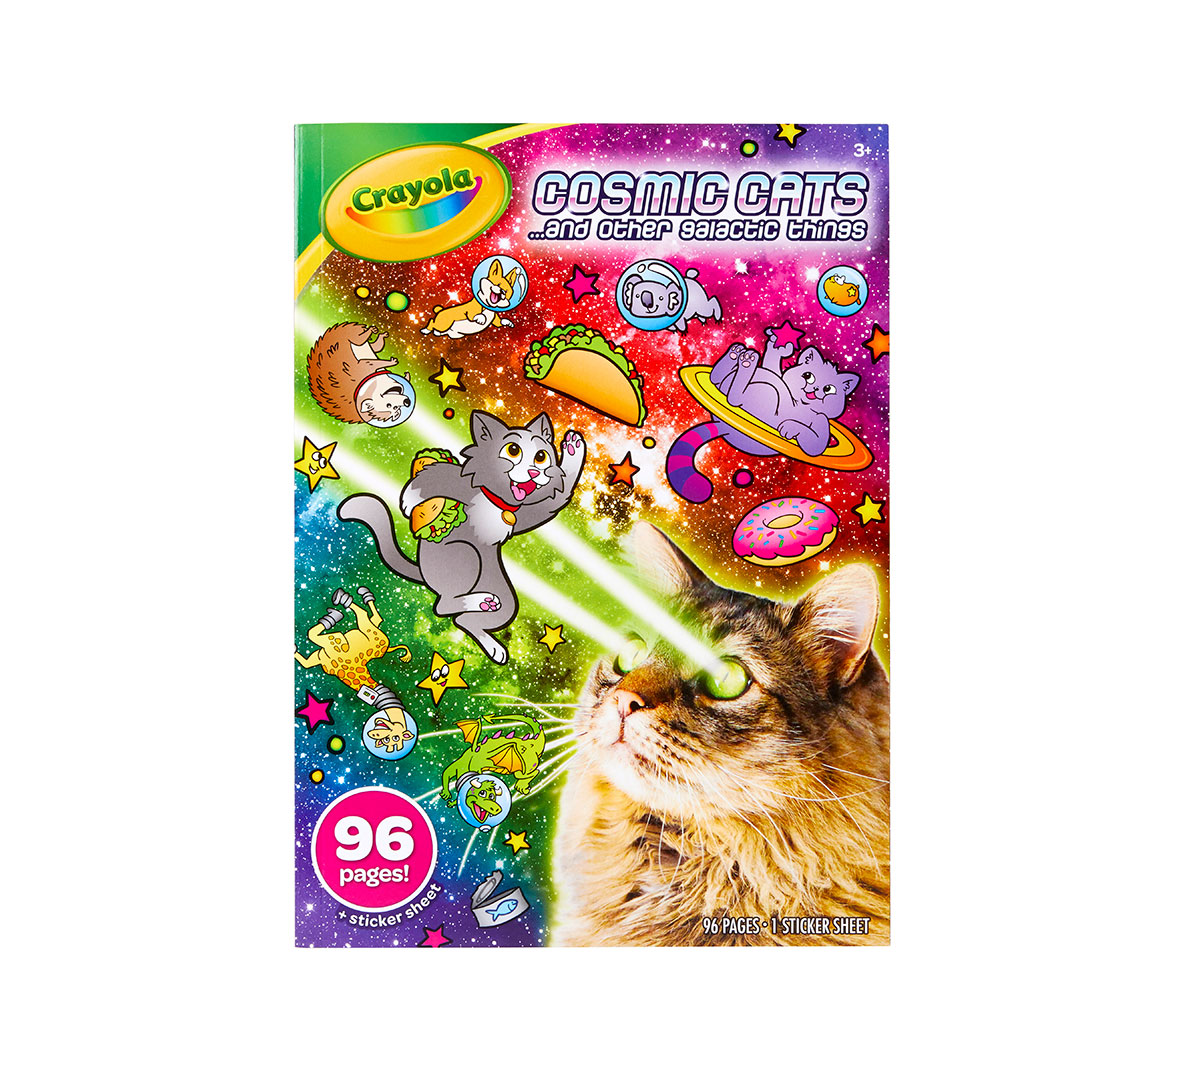 Download Crayola Cosmic Cats Coloring Book, Sticker Sheet, Gift for Kids, 96 pgs | Crayola